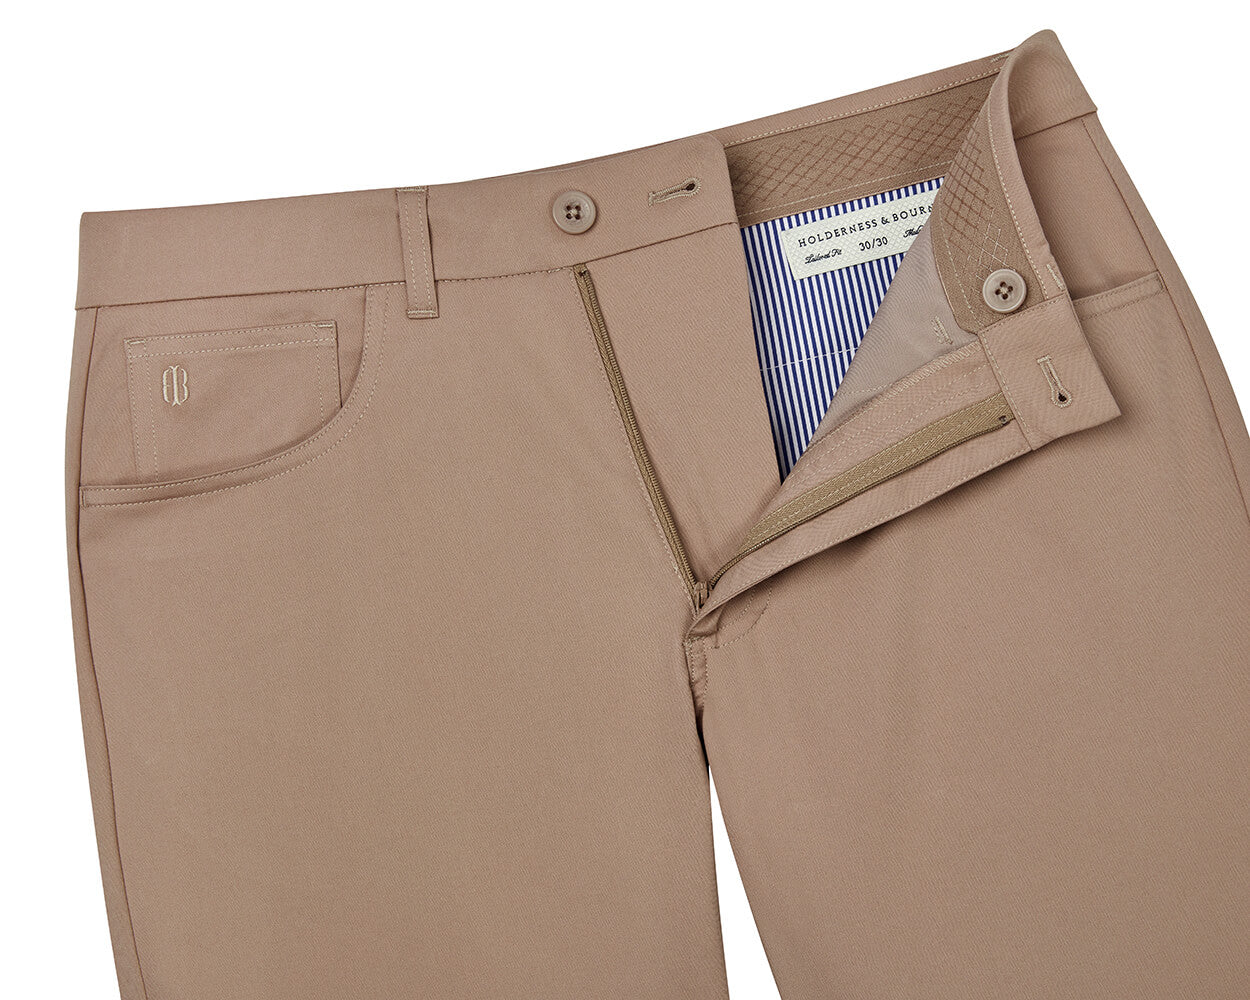 The Warner Pant: Fescue 32" Length